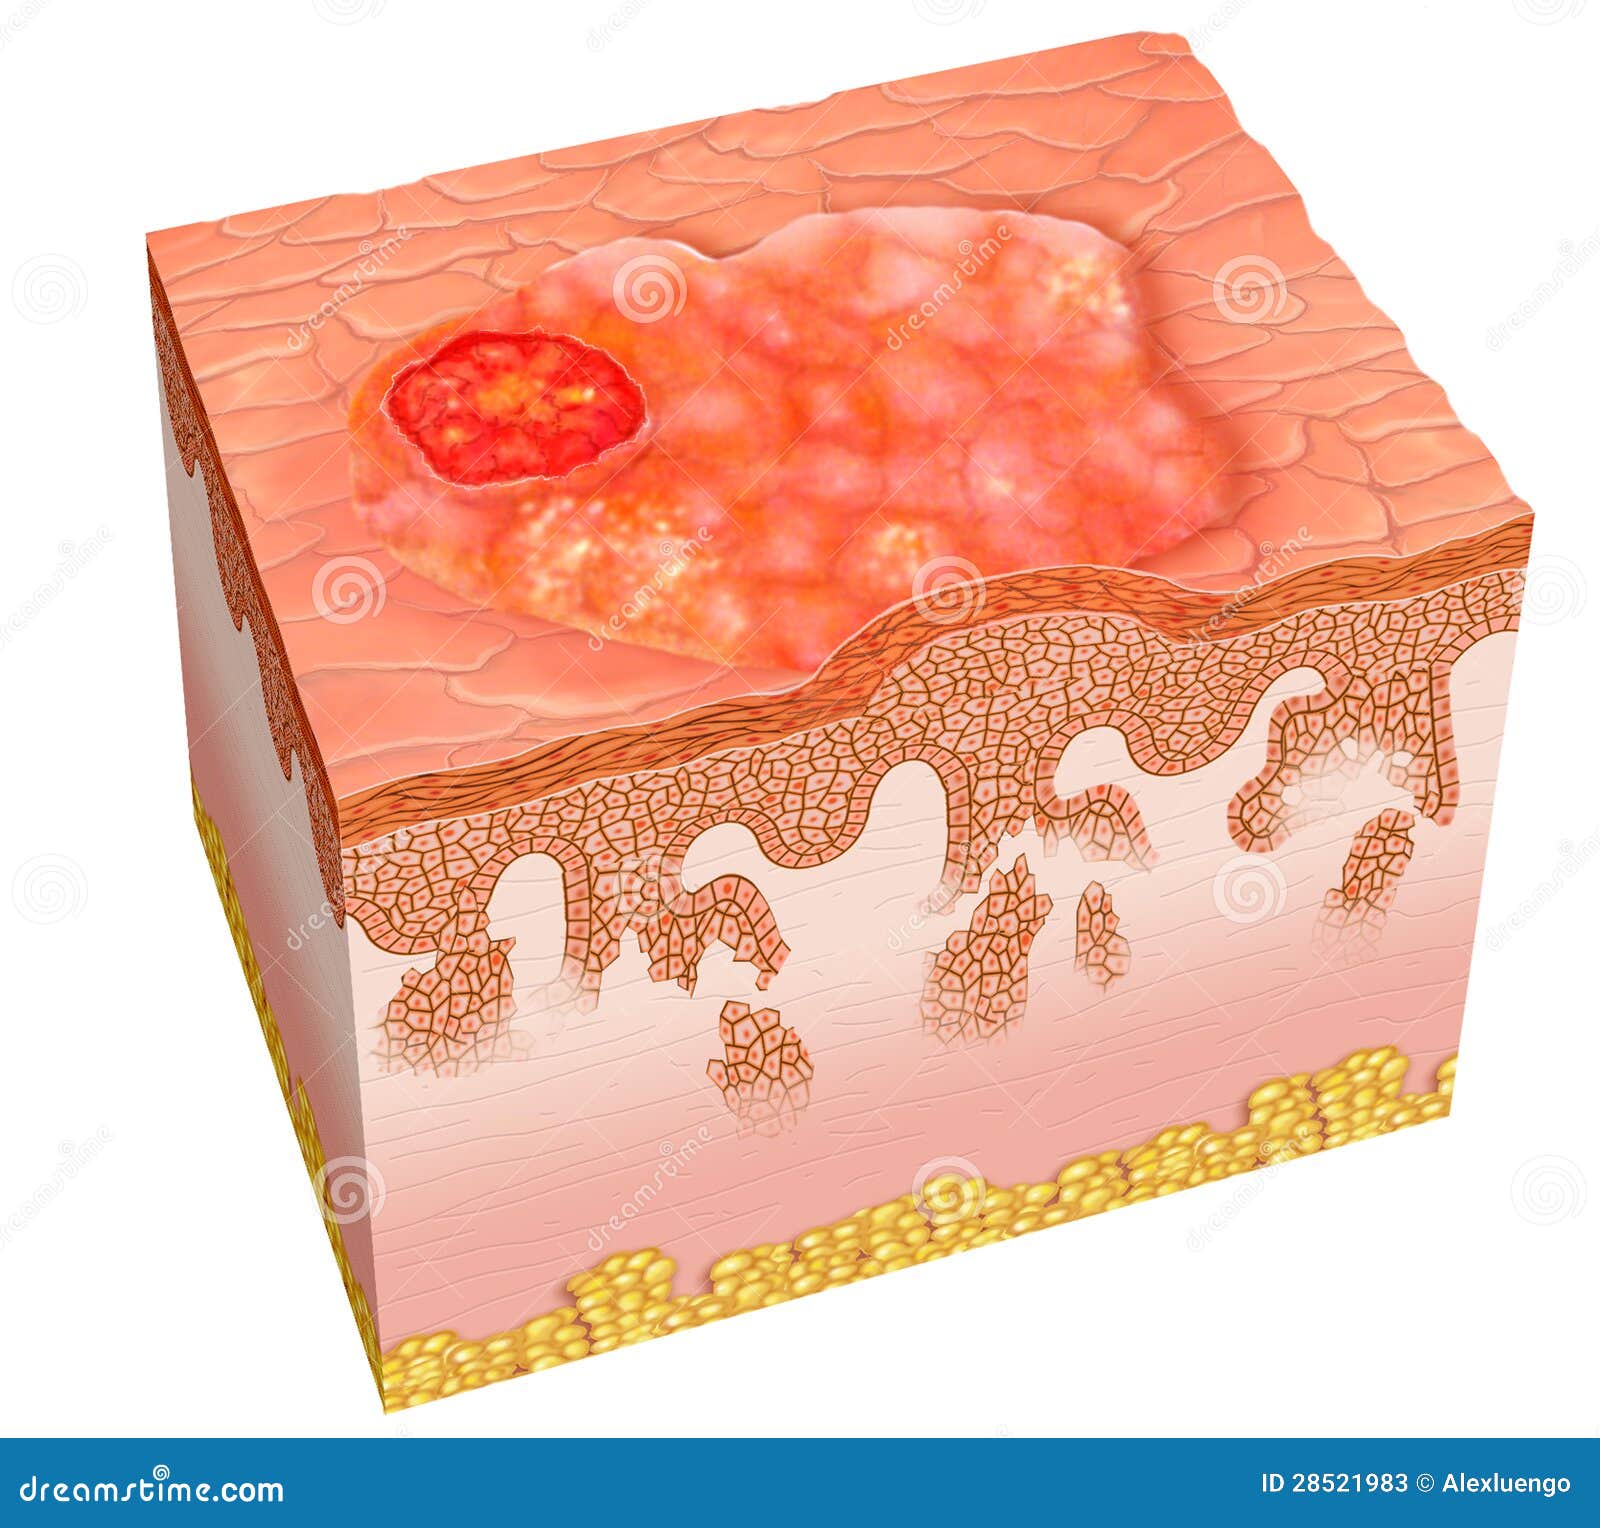 Squamous cell carcinoma stock illustration. Illustration of trunk ...